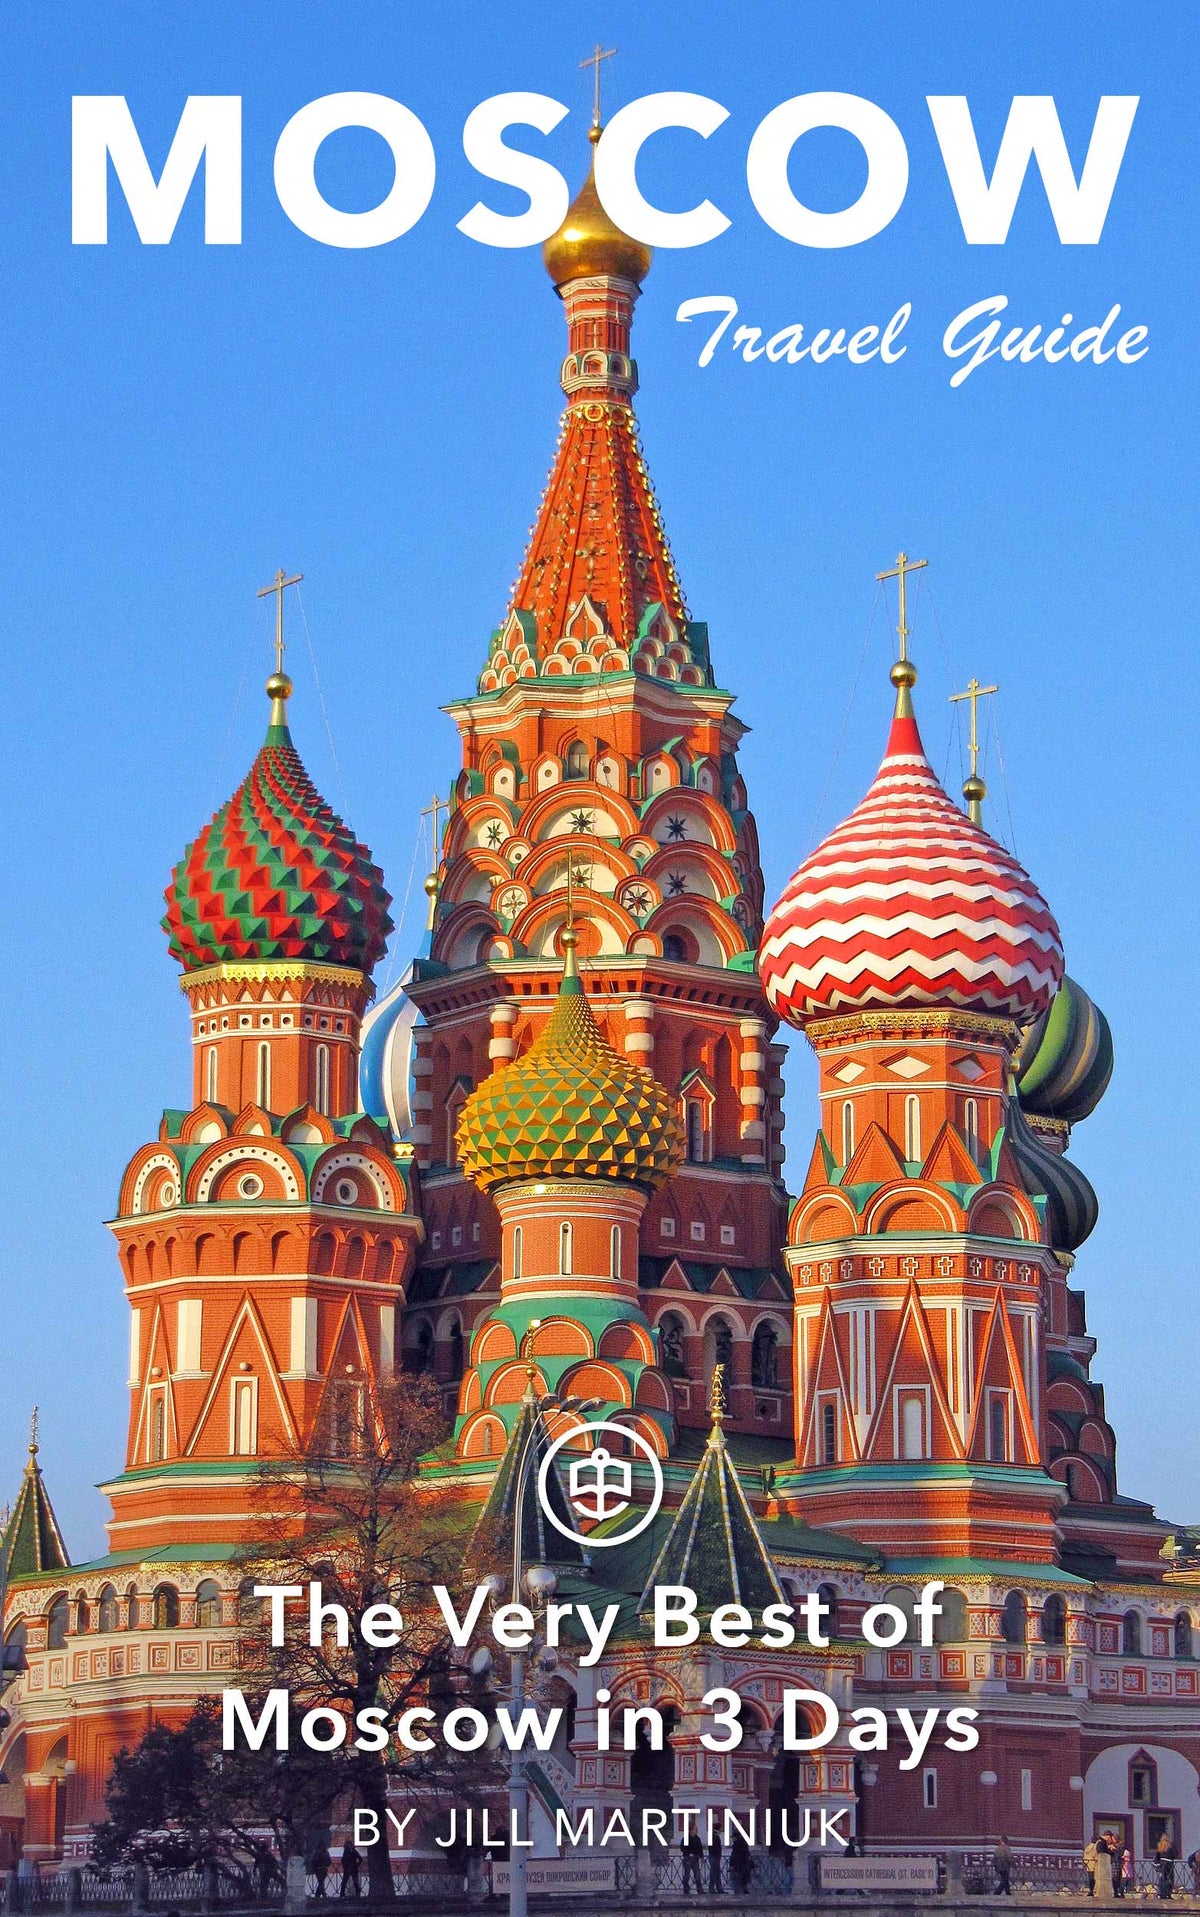 The Very Best of Moscow in 3 Days